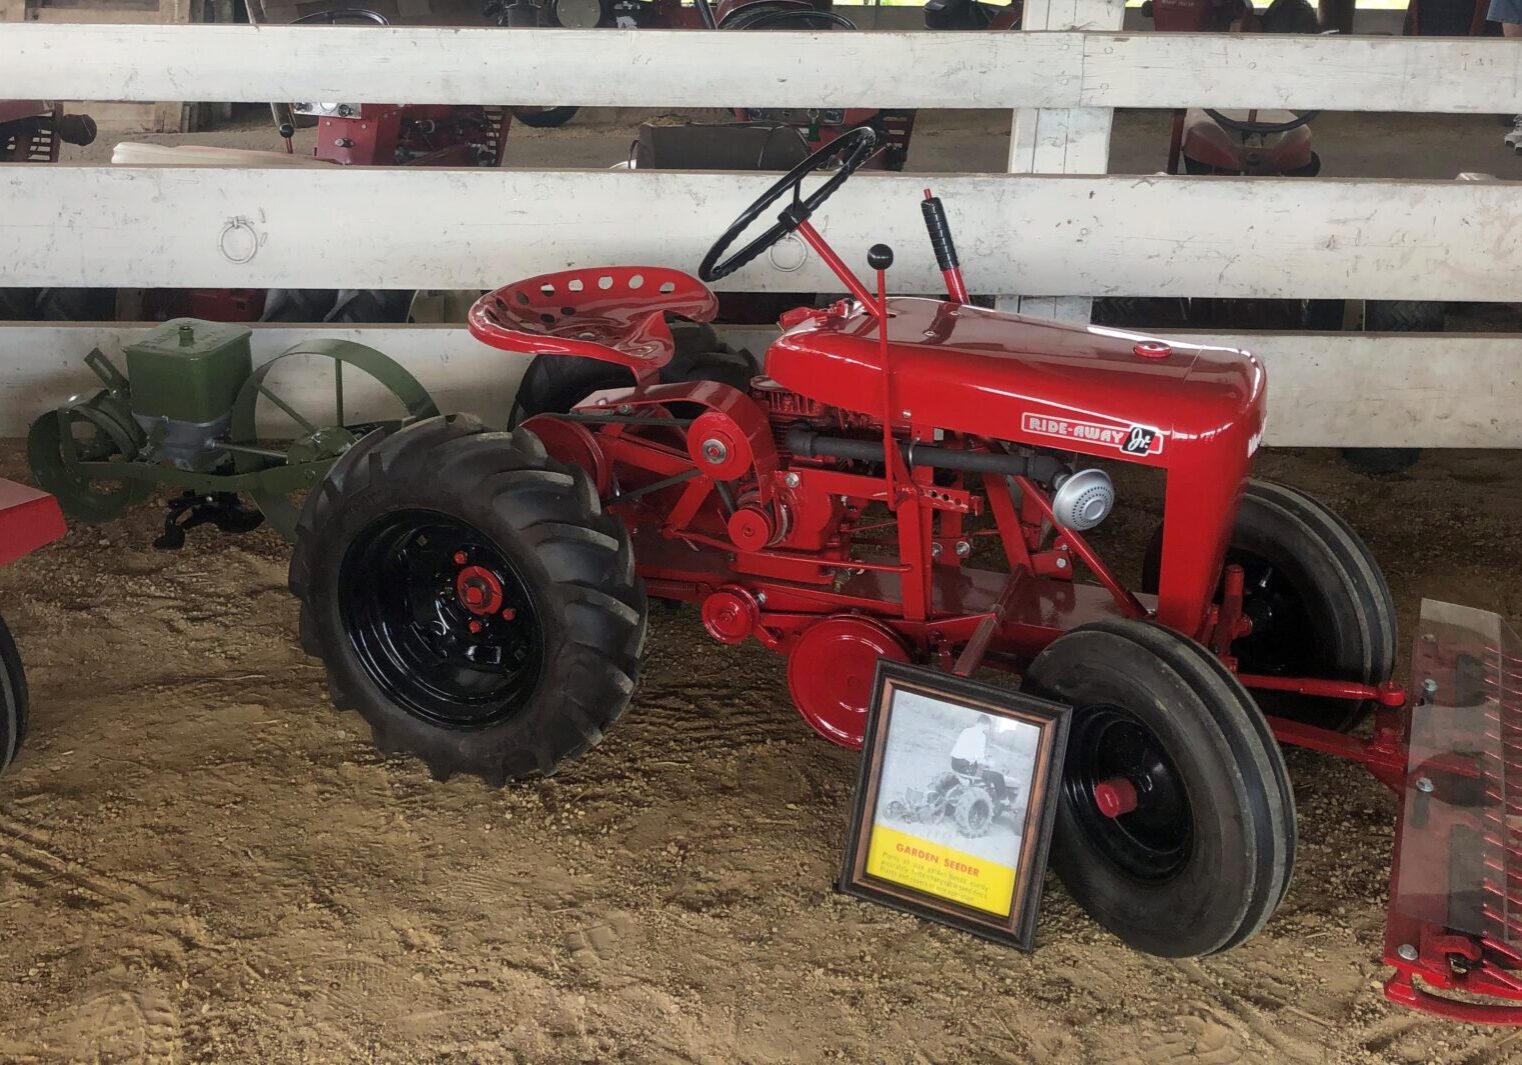 A red tractor is parked in the dirt.